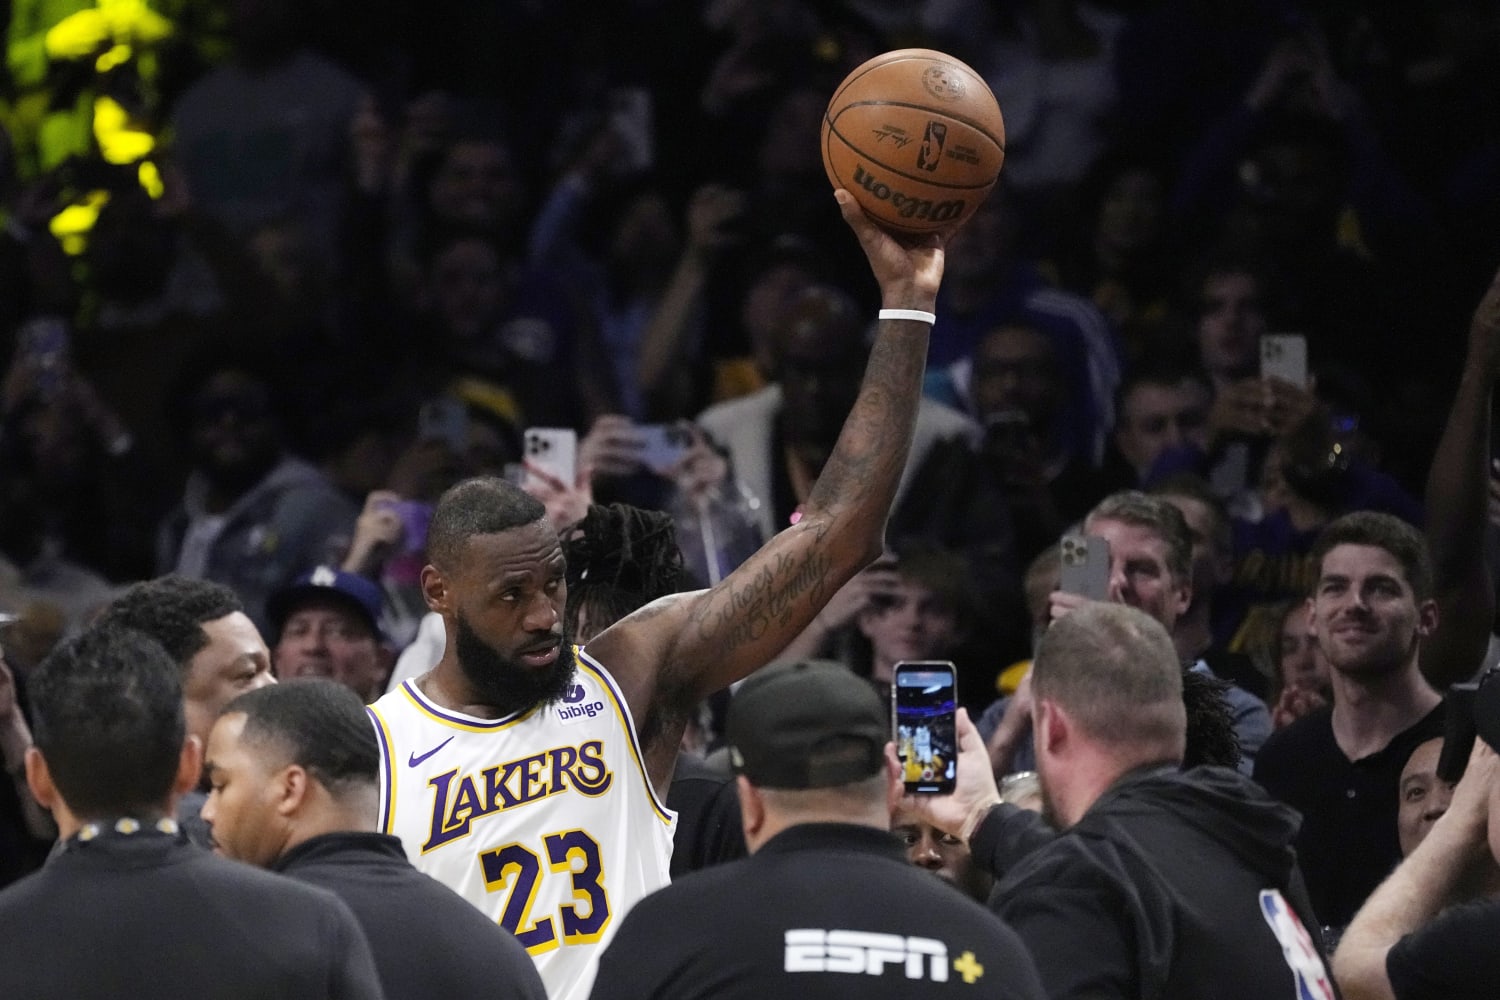 LeBron James surpasses 40,000 career points, another milestone for the NBA legend